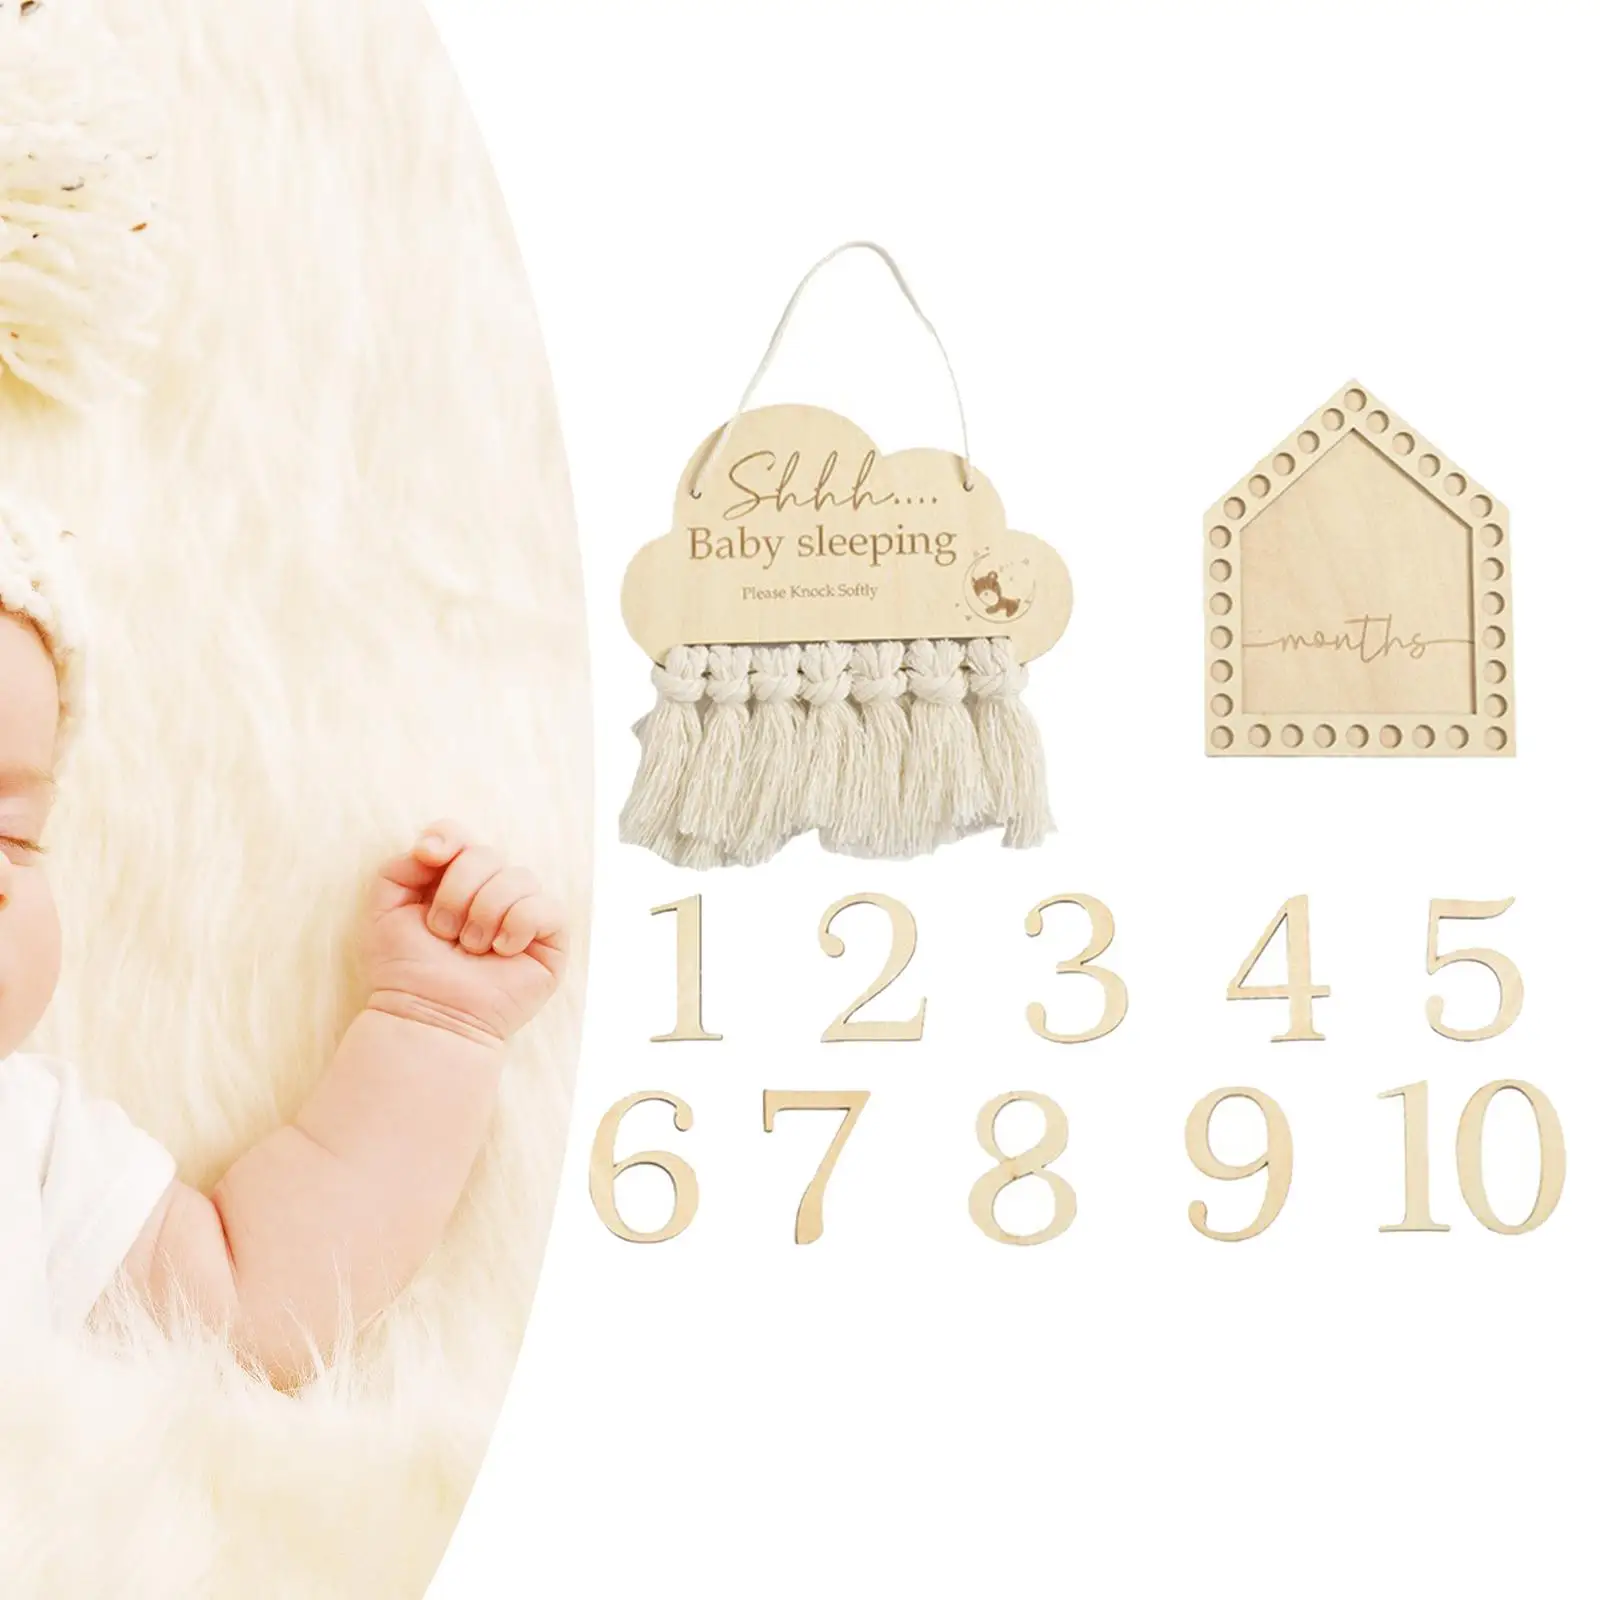 Creative babies Milestone Cards Wooden Monthly Cards Newborn Photoshoot Props